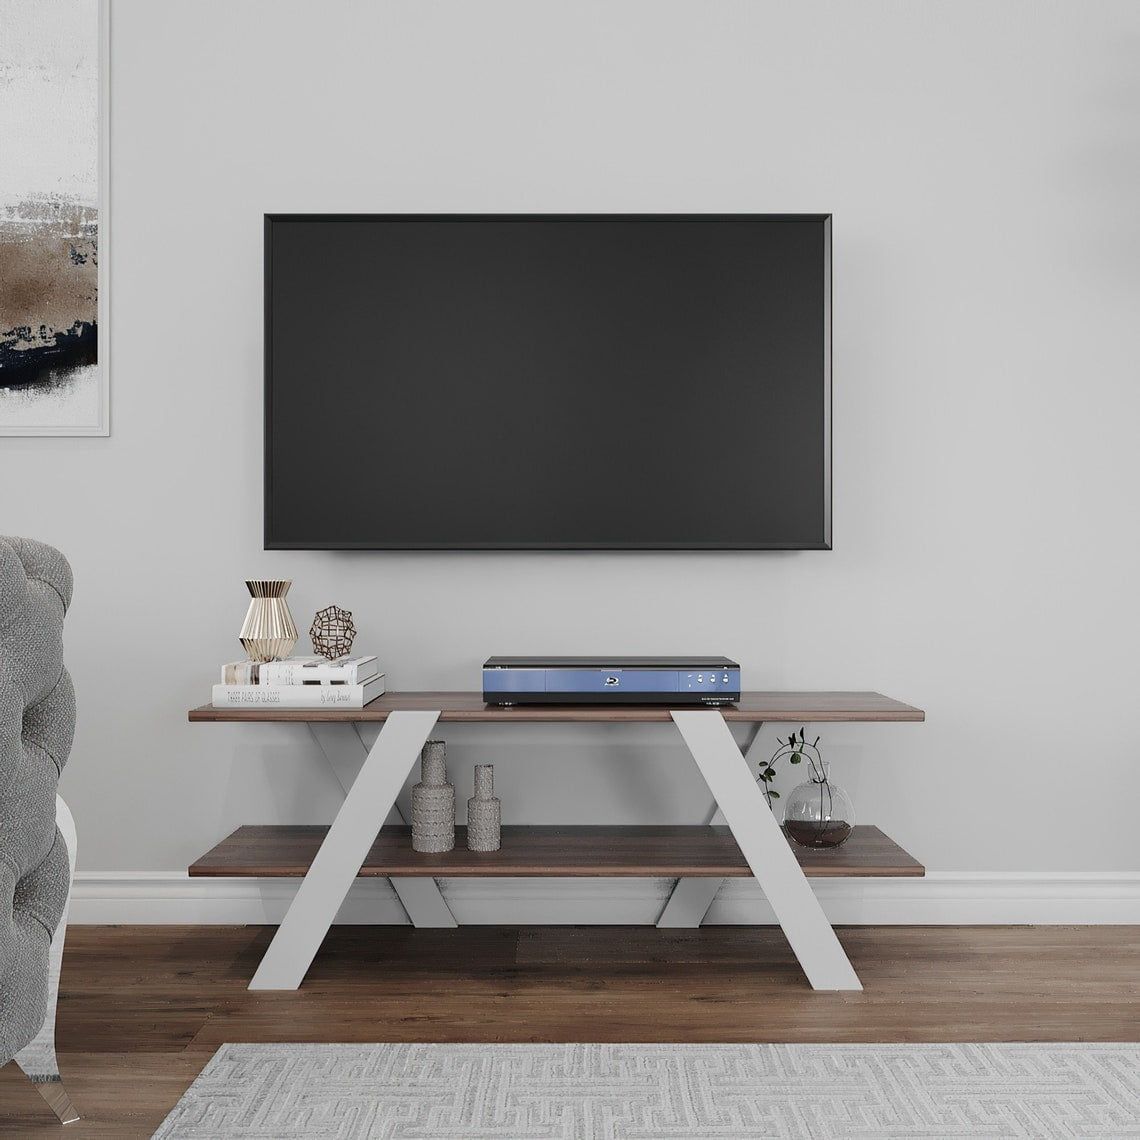 Modern 2 Tier Wood Tv Stand For Tvs Up To 55 Inch – Walmart With Regard To Tier Stands For Tvs (View 9 of 20)